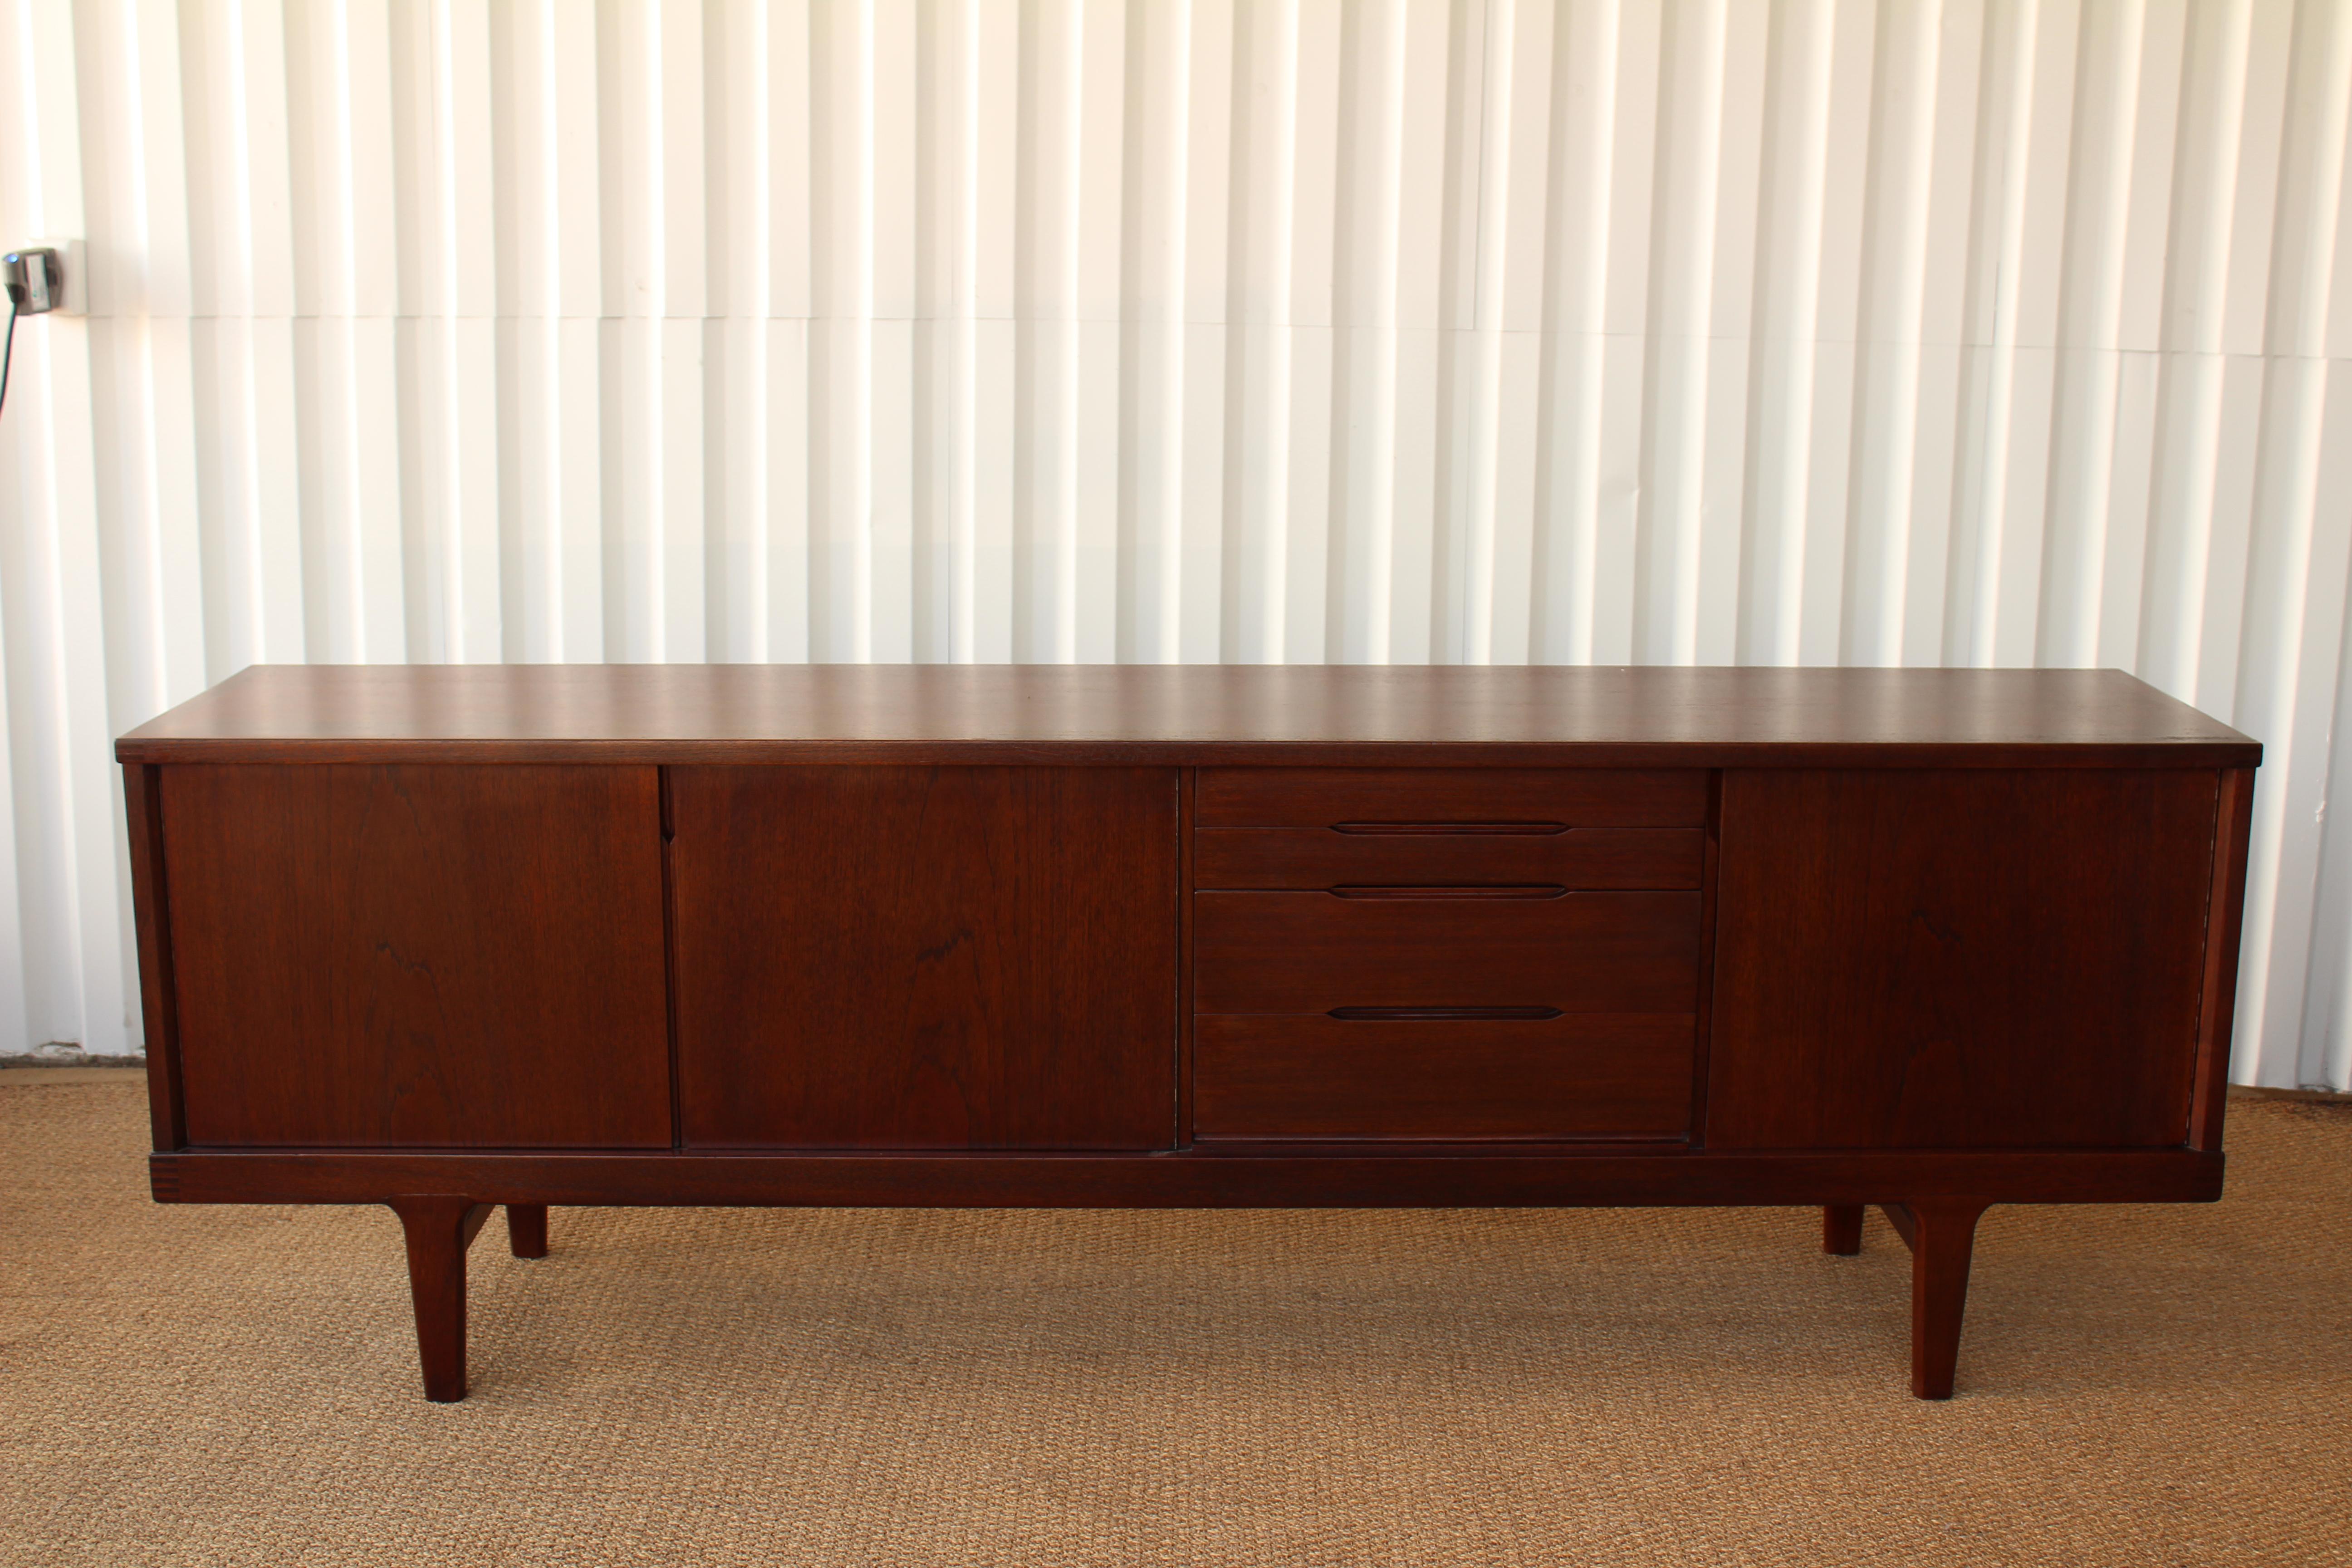 Long credenza in teak, with an oak interior. Made in Denmark, 1950s. Unmarked, unknown designer. Recently refinished. Features adjustable shelving and 4 drawers.